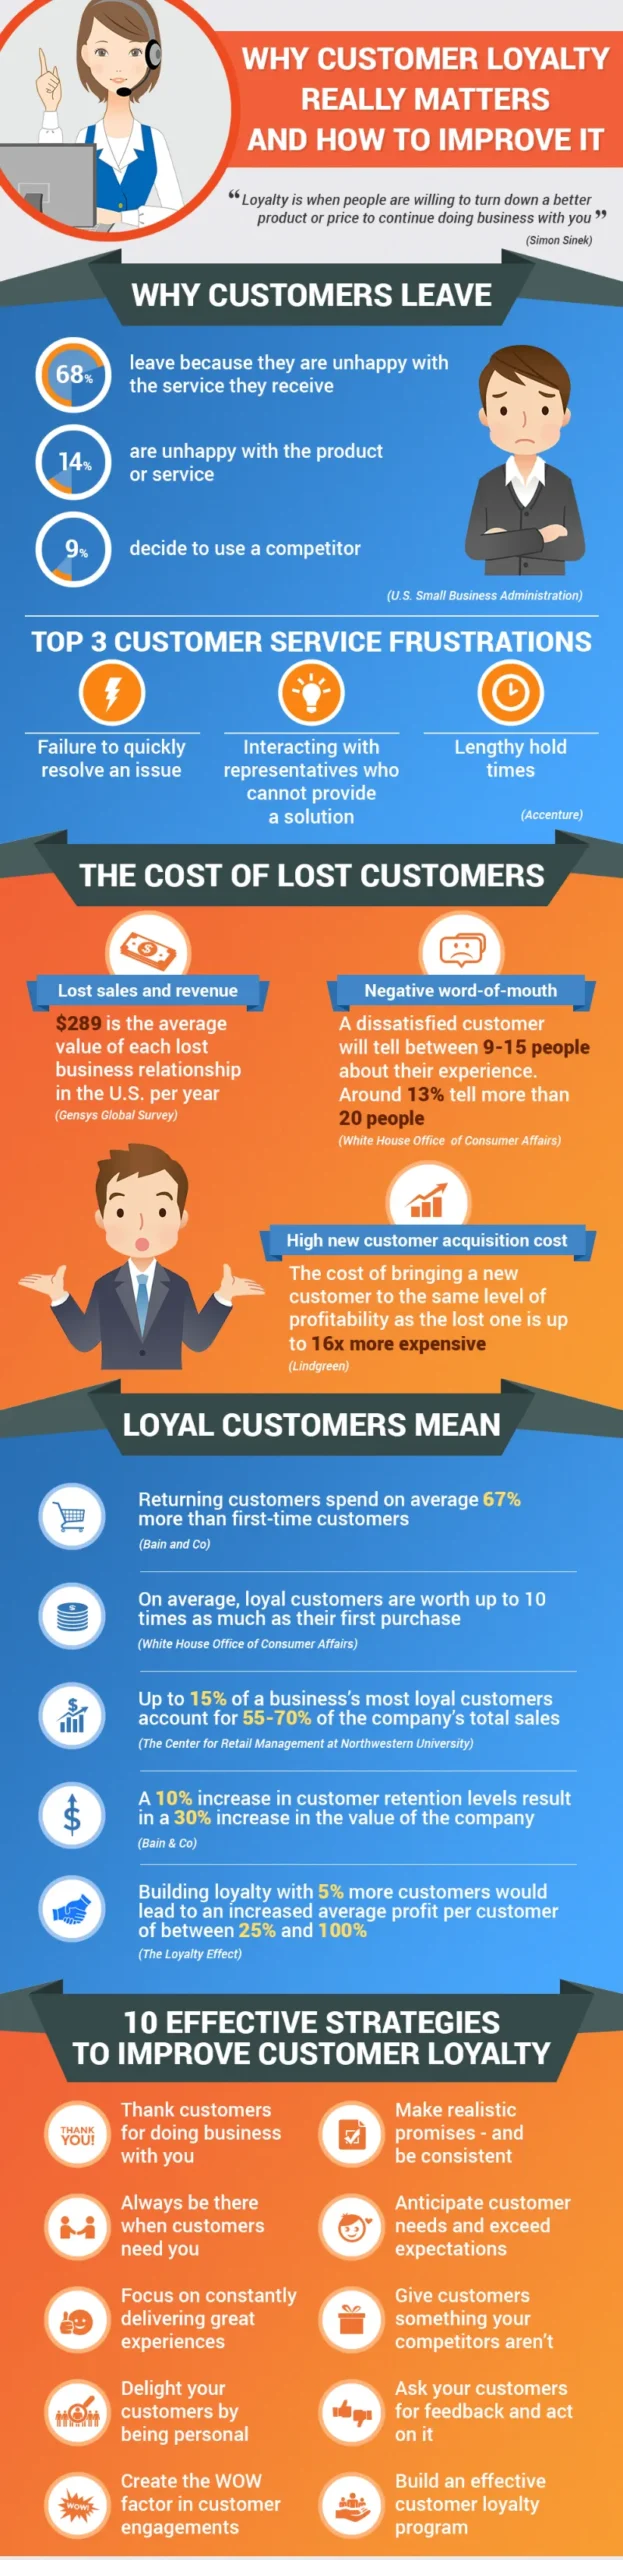 Why You Need to Improve Customer Loyalty Program